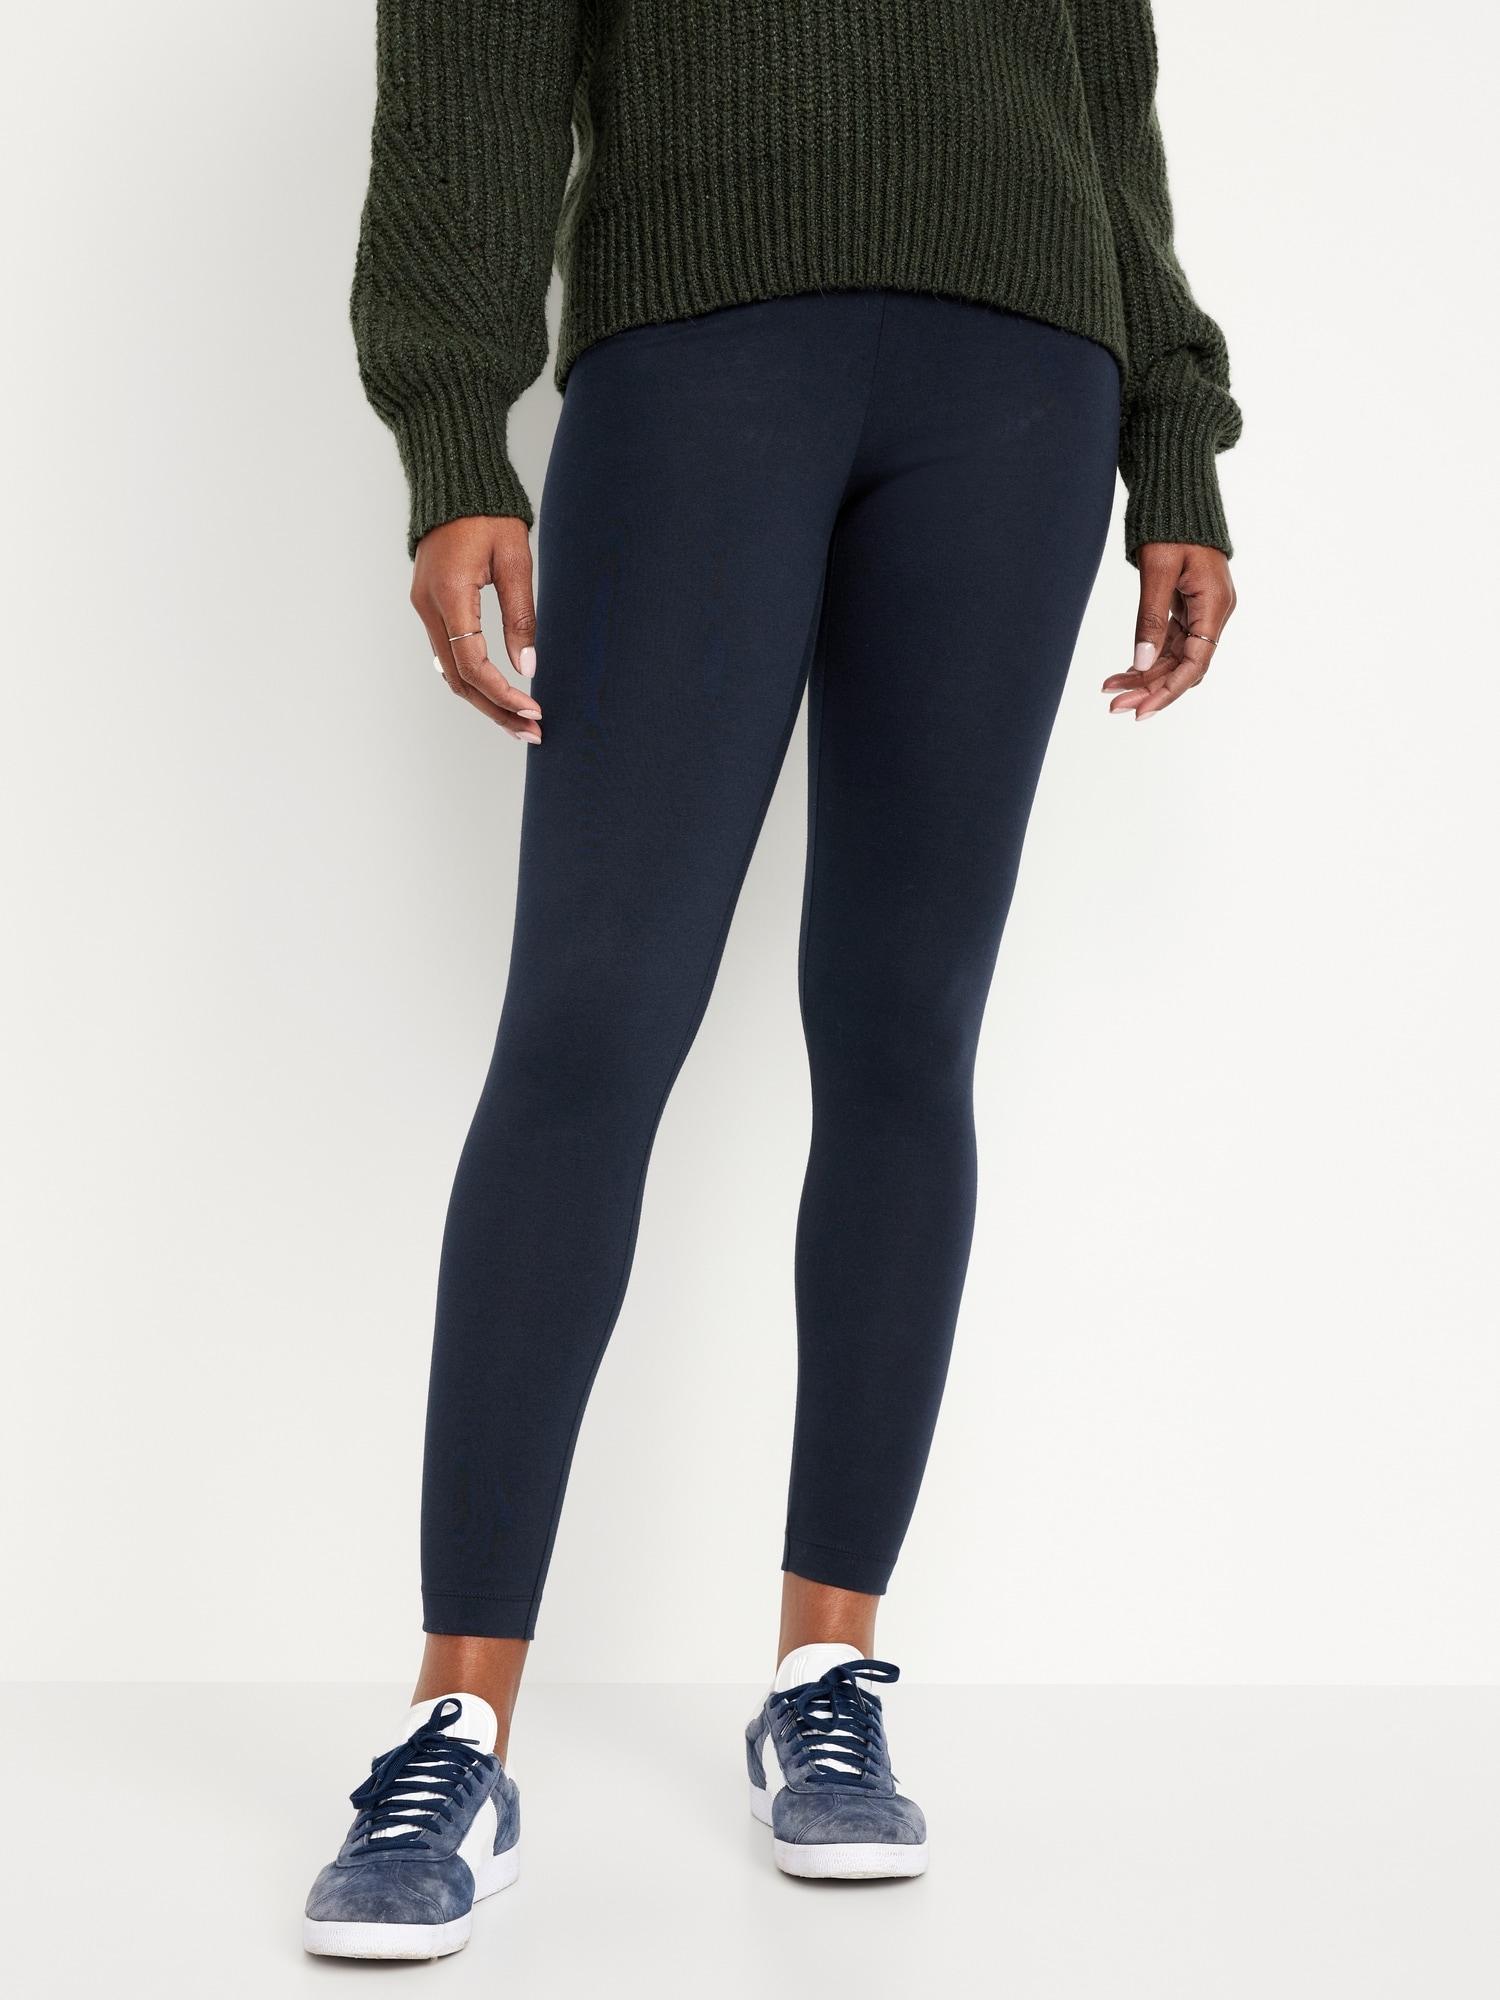 Old Navy - Women's High Waisted Everyday Leggings, and/or Workout